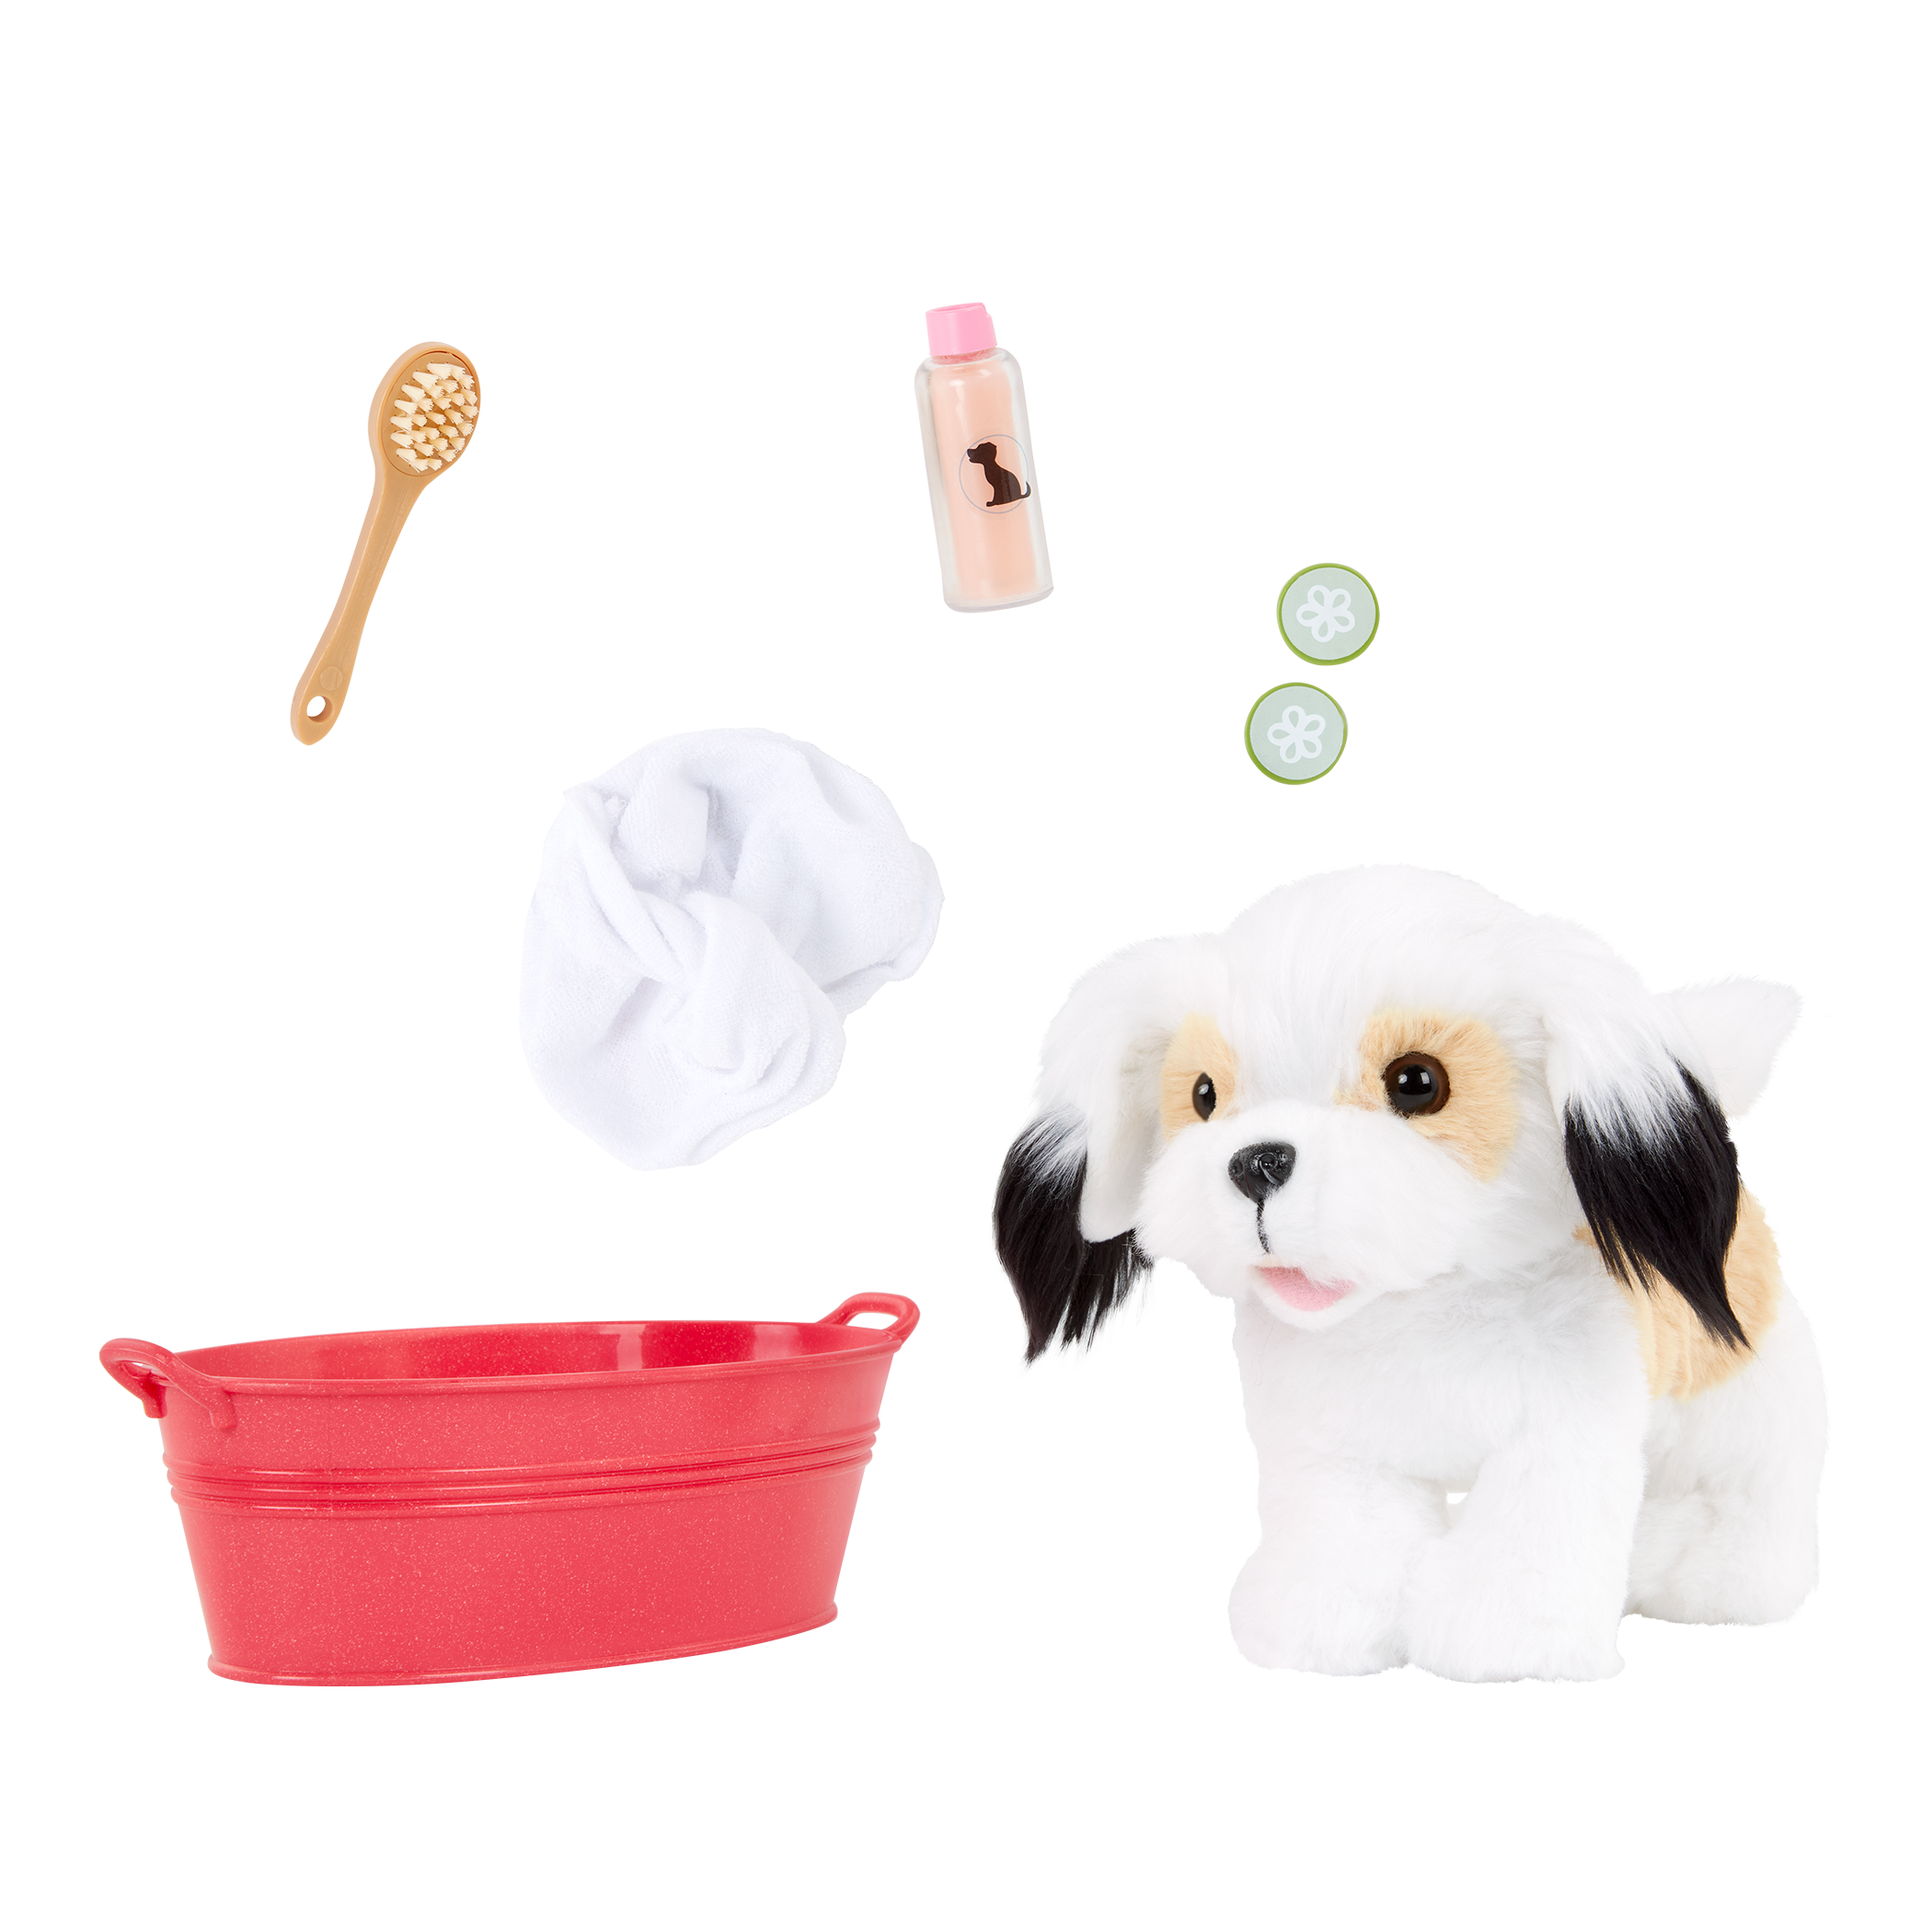 Our Generation Spa Day Pet Set with Shih Tzu Plush 